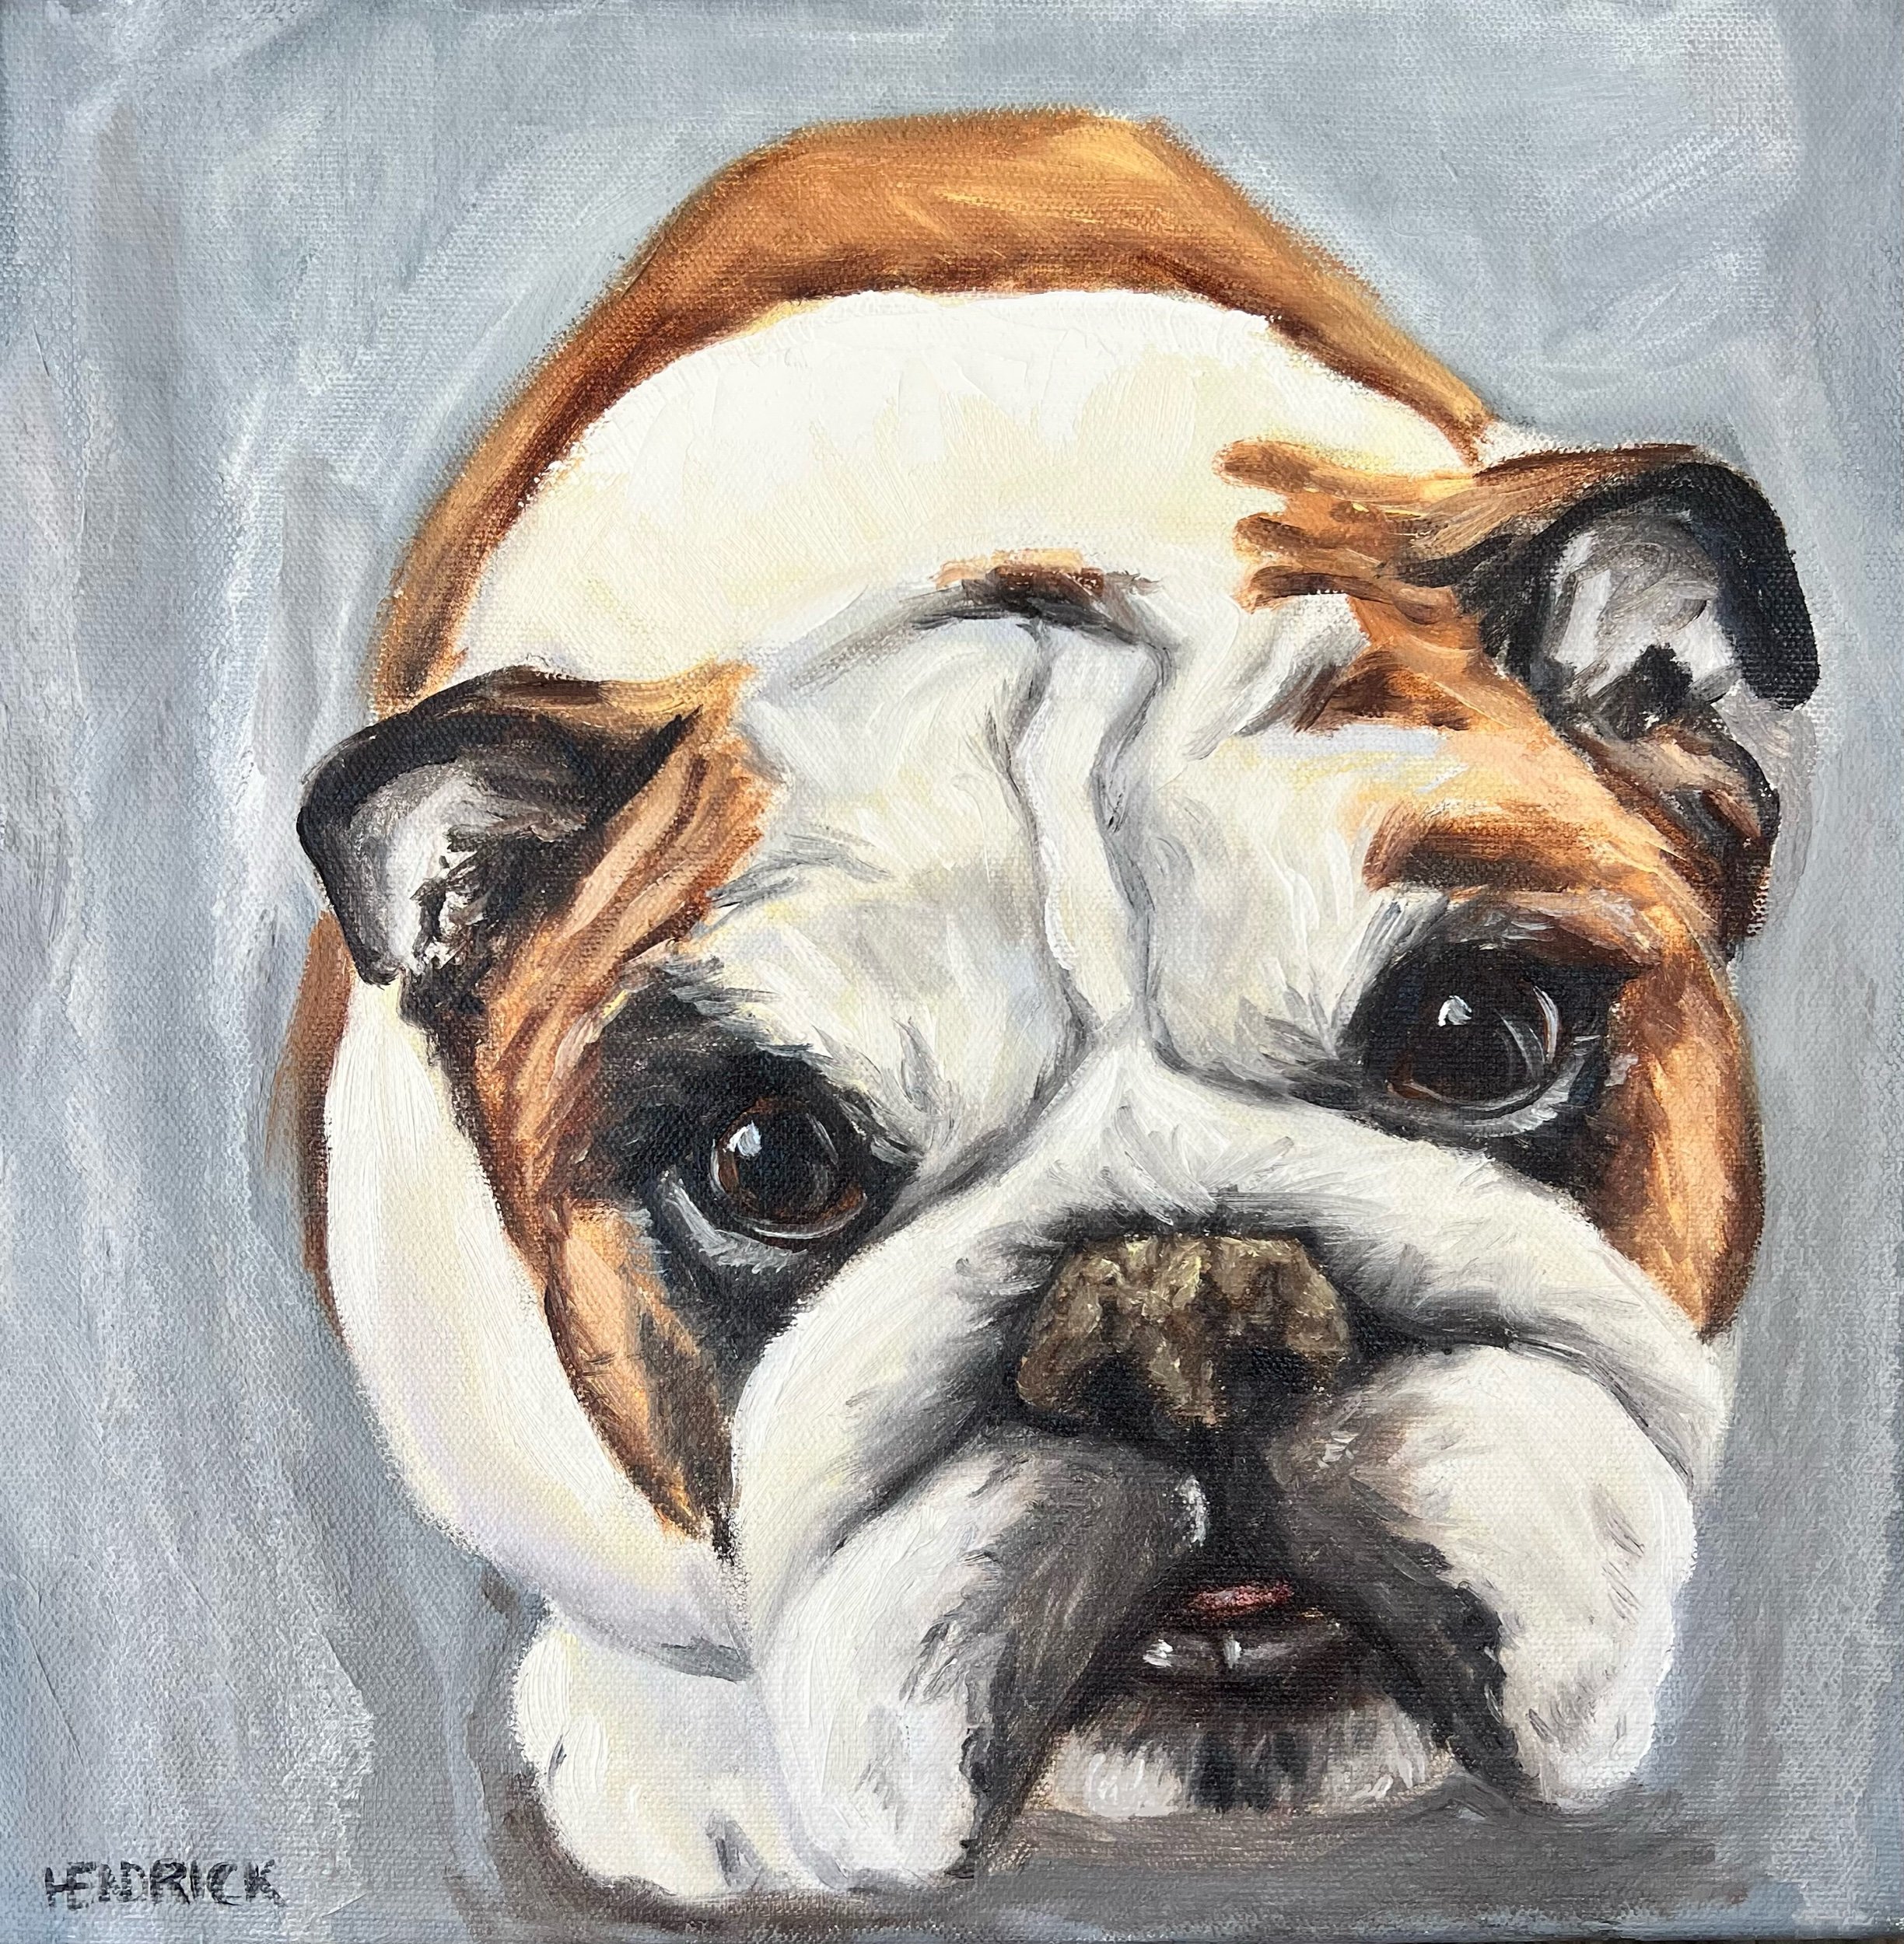 Jimmys Dog, 12x12” Oil on canvas